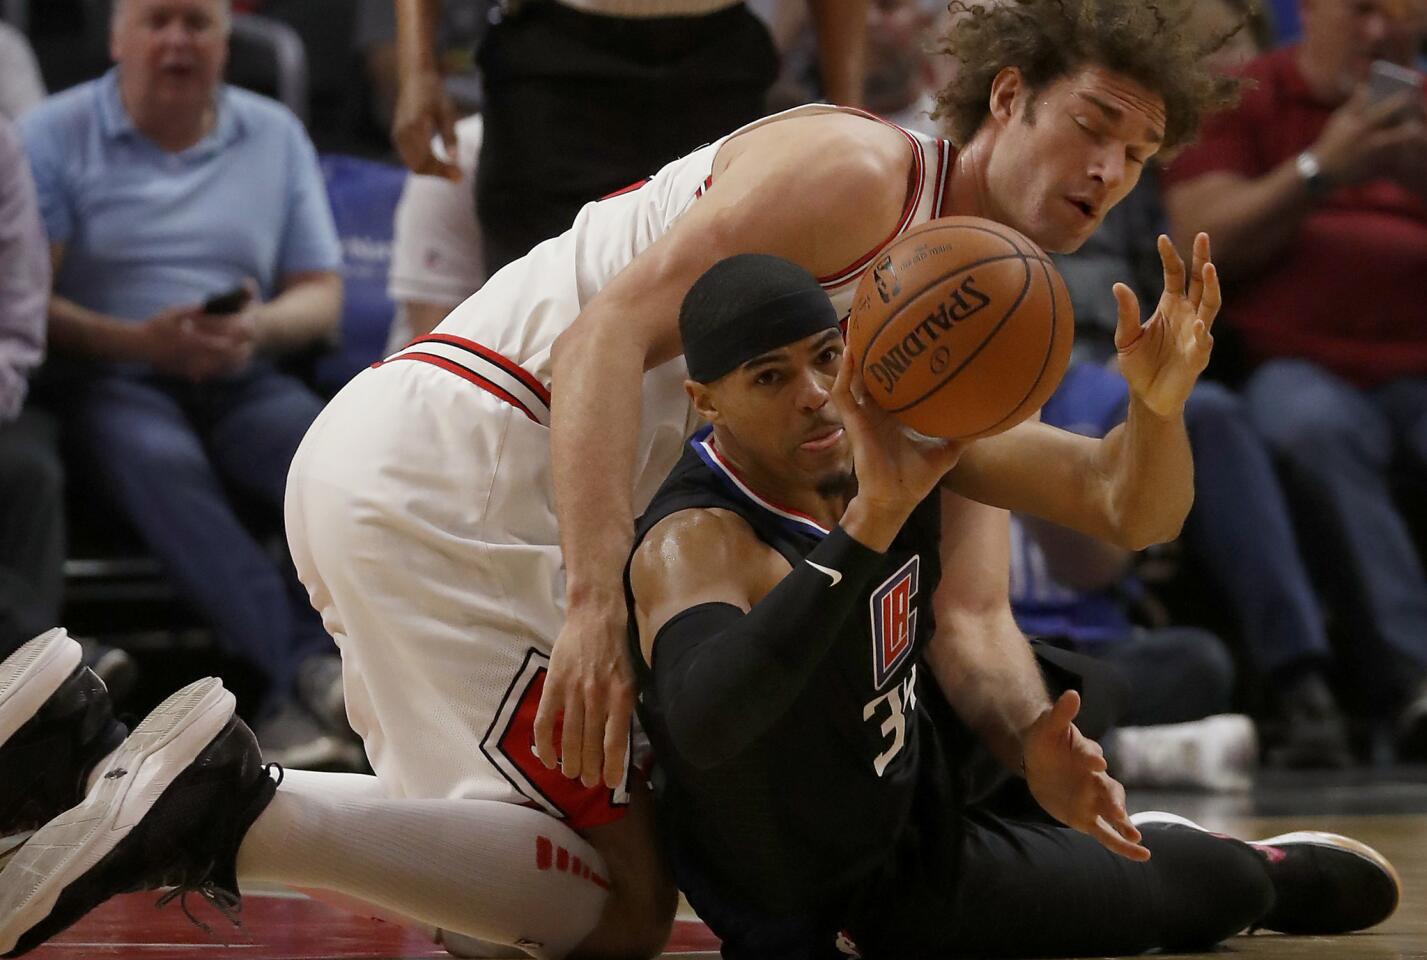 Clippers forward Tobias Harris battles for control of the ball against Bulls center Robin Lopez in the first quarter.